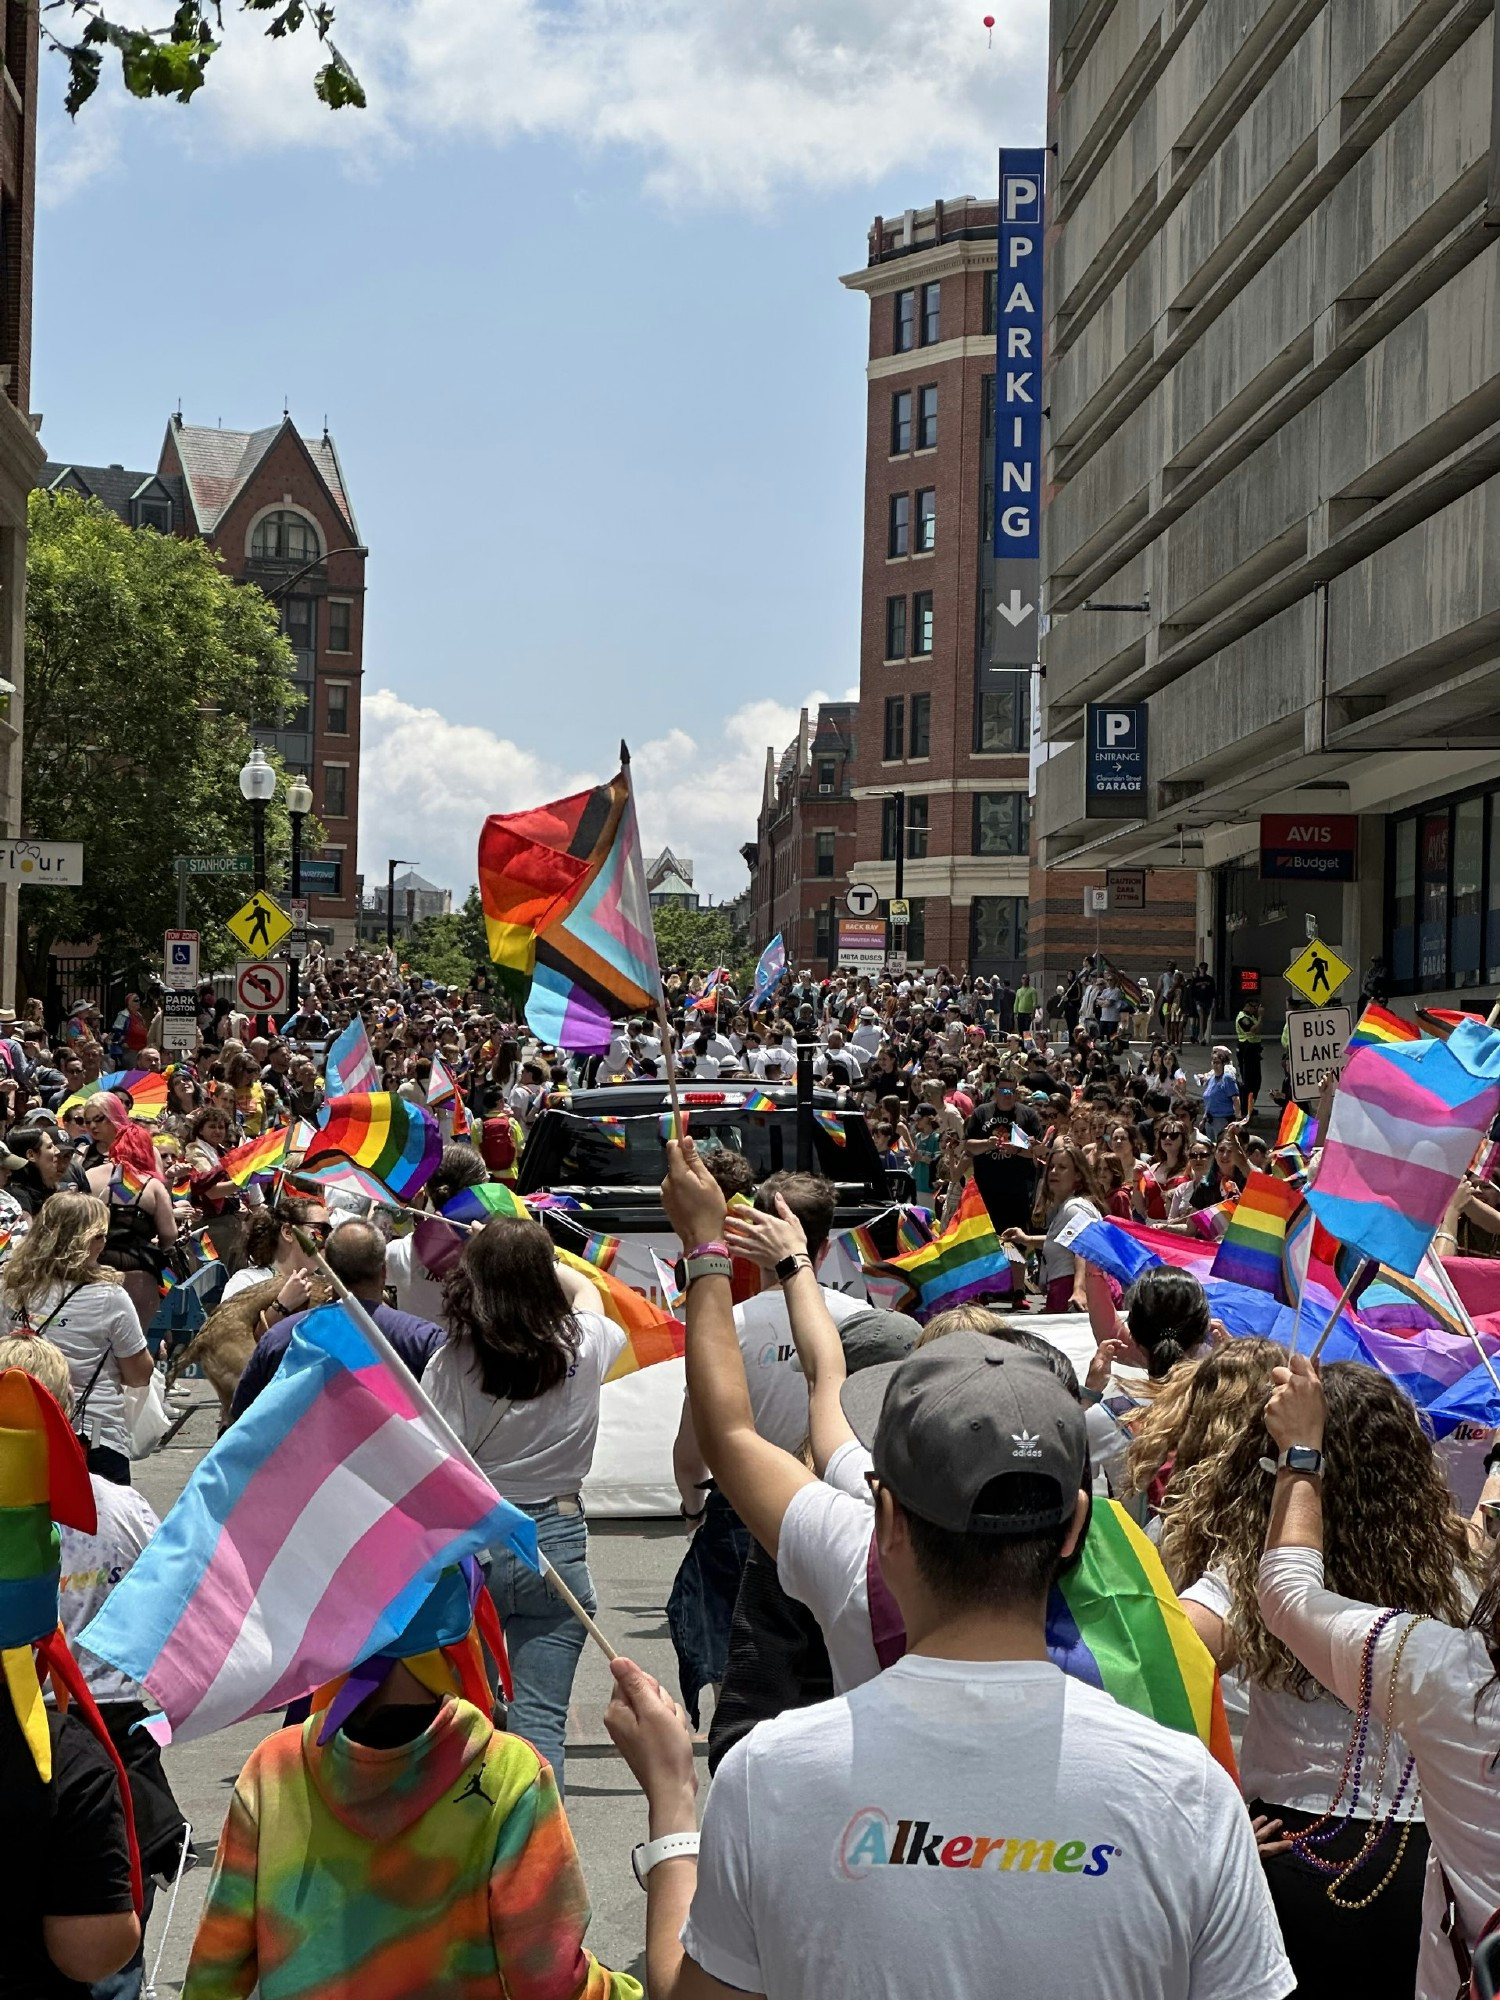 Alkermes employees marching in Boston’s annual Pride Parade in 2023.